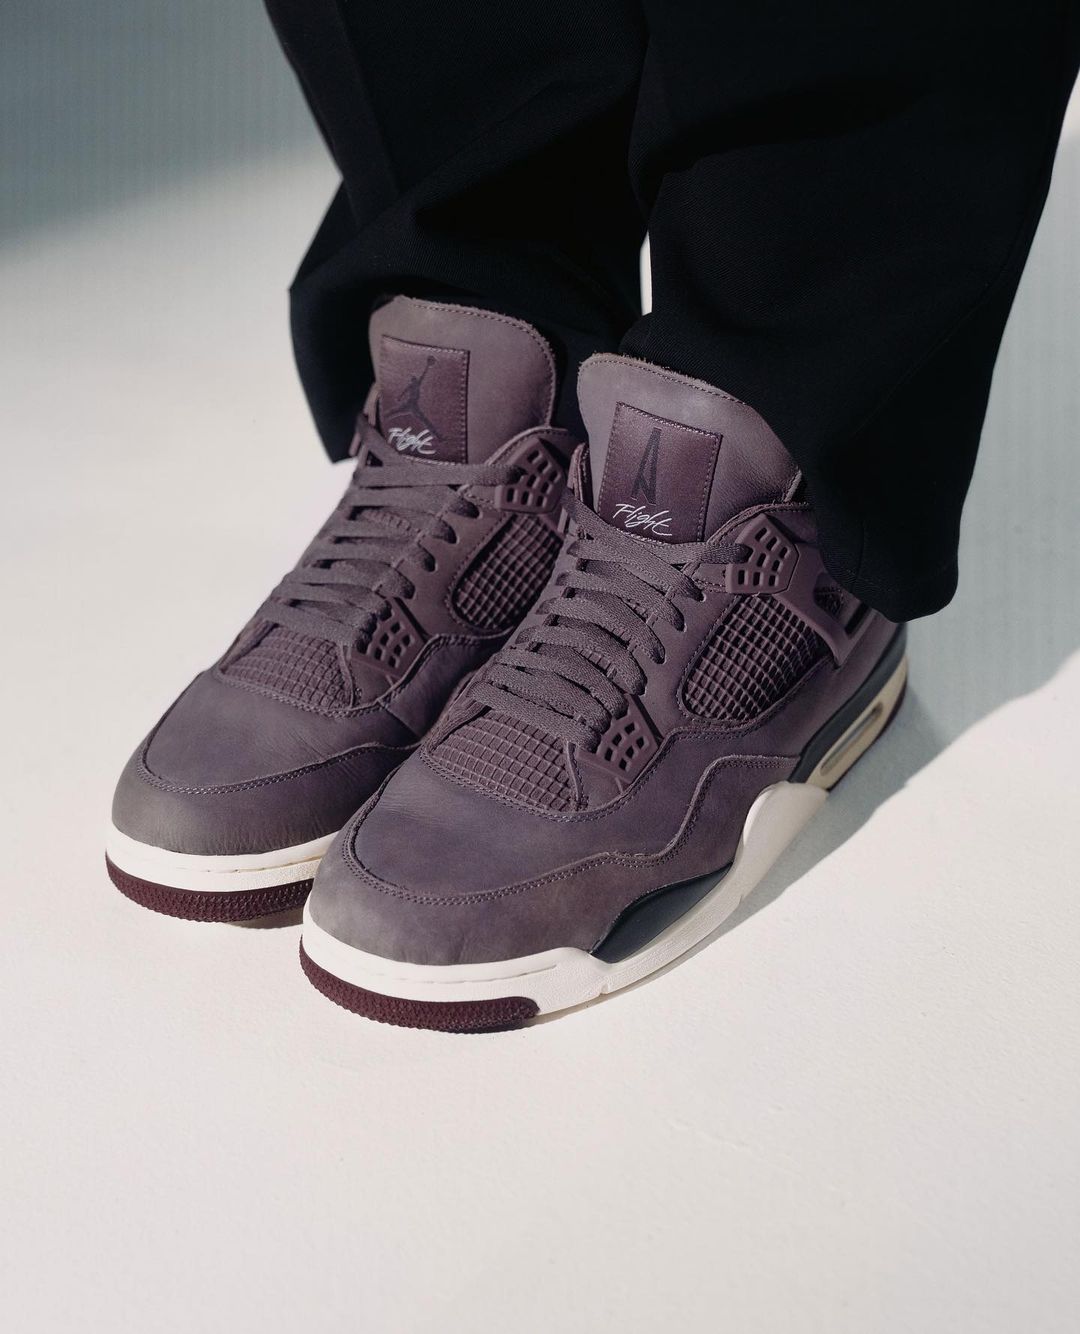 A Ma Maniére x Air Jordan 4 'Violet Ore' – IN-STORE RAFFLE